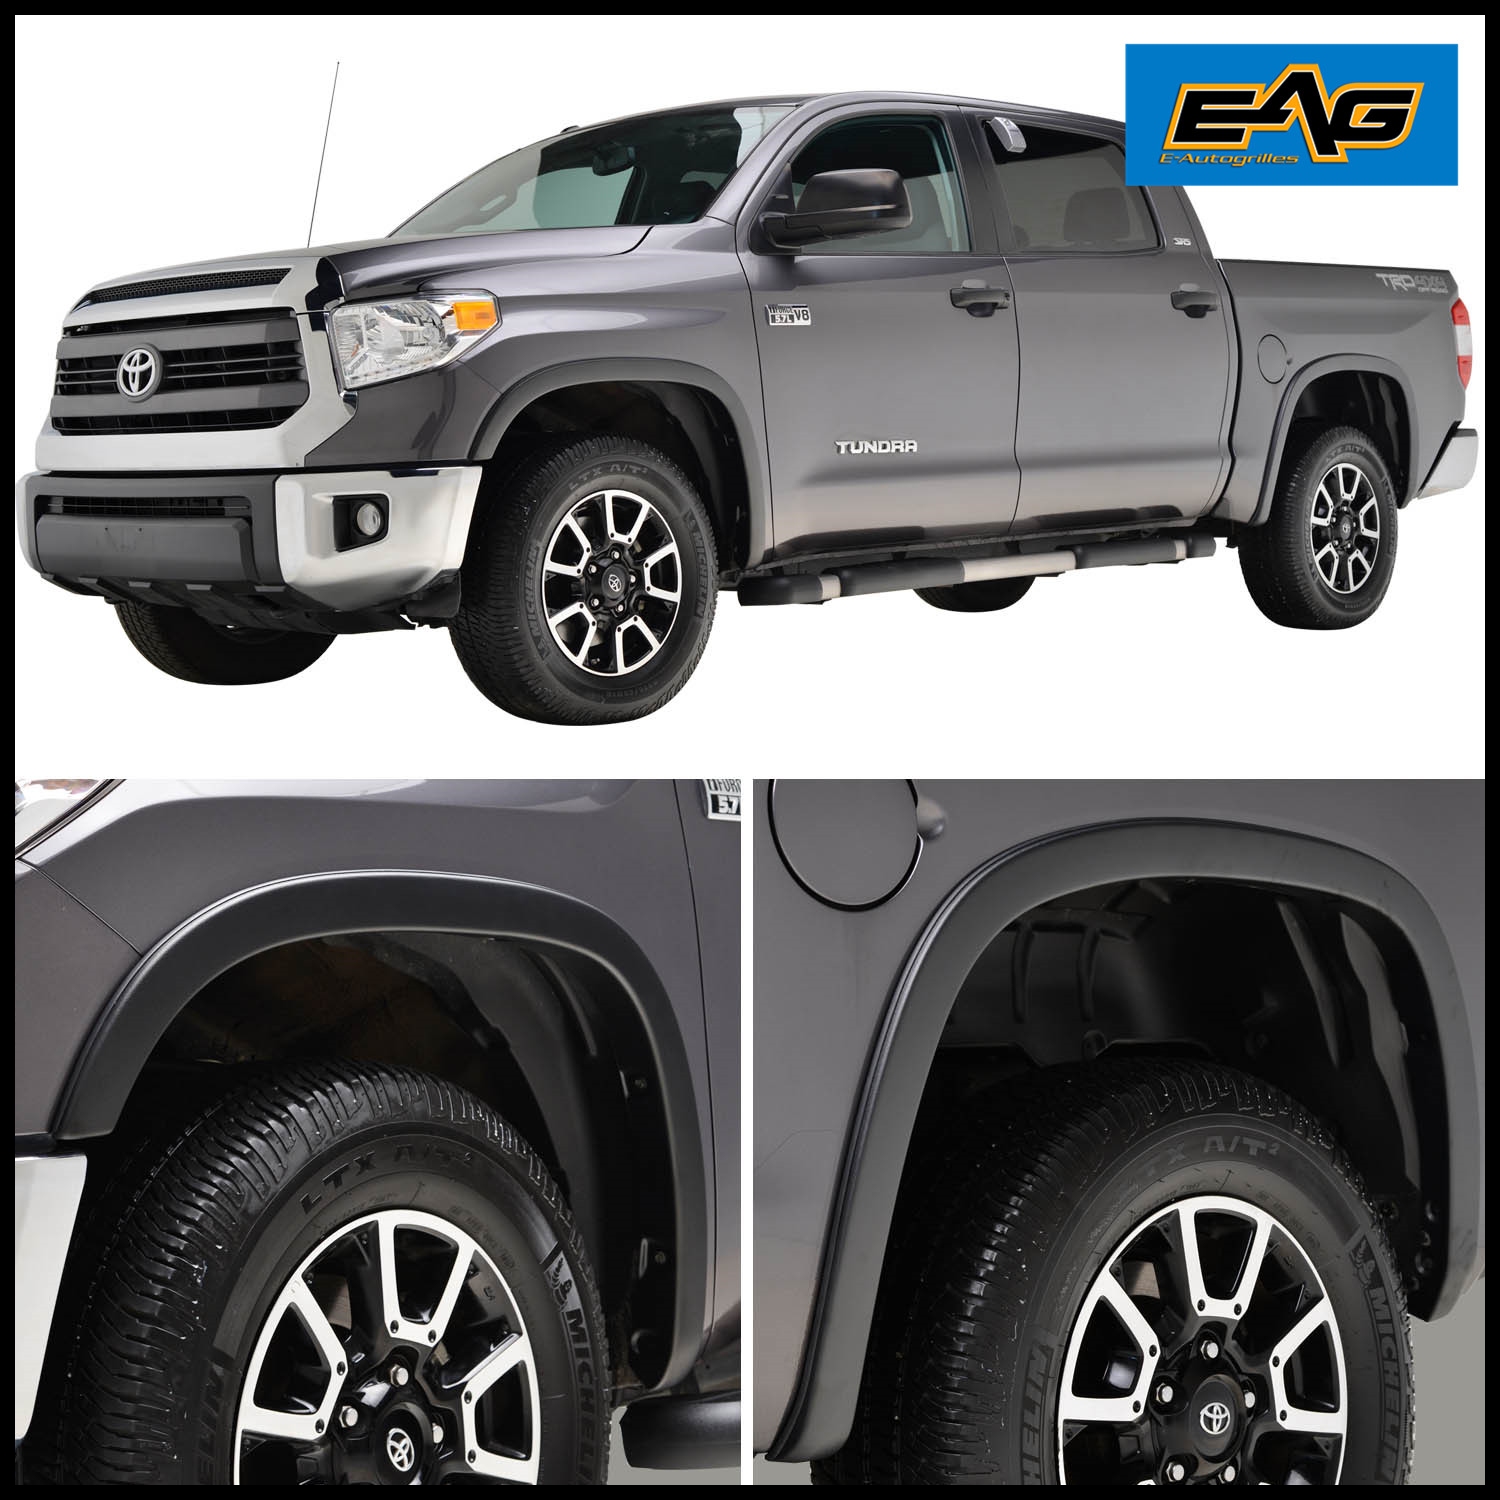 EAG Textured Satin Black Styline Series 4PC Fender Flare for 14 17 Toyota Tundra